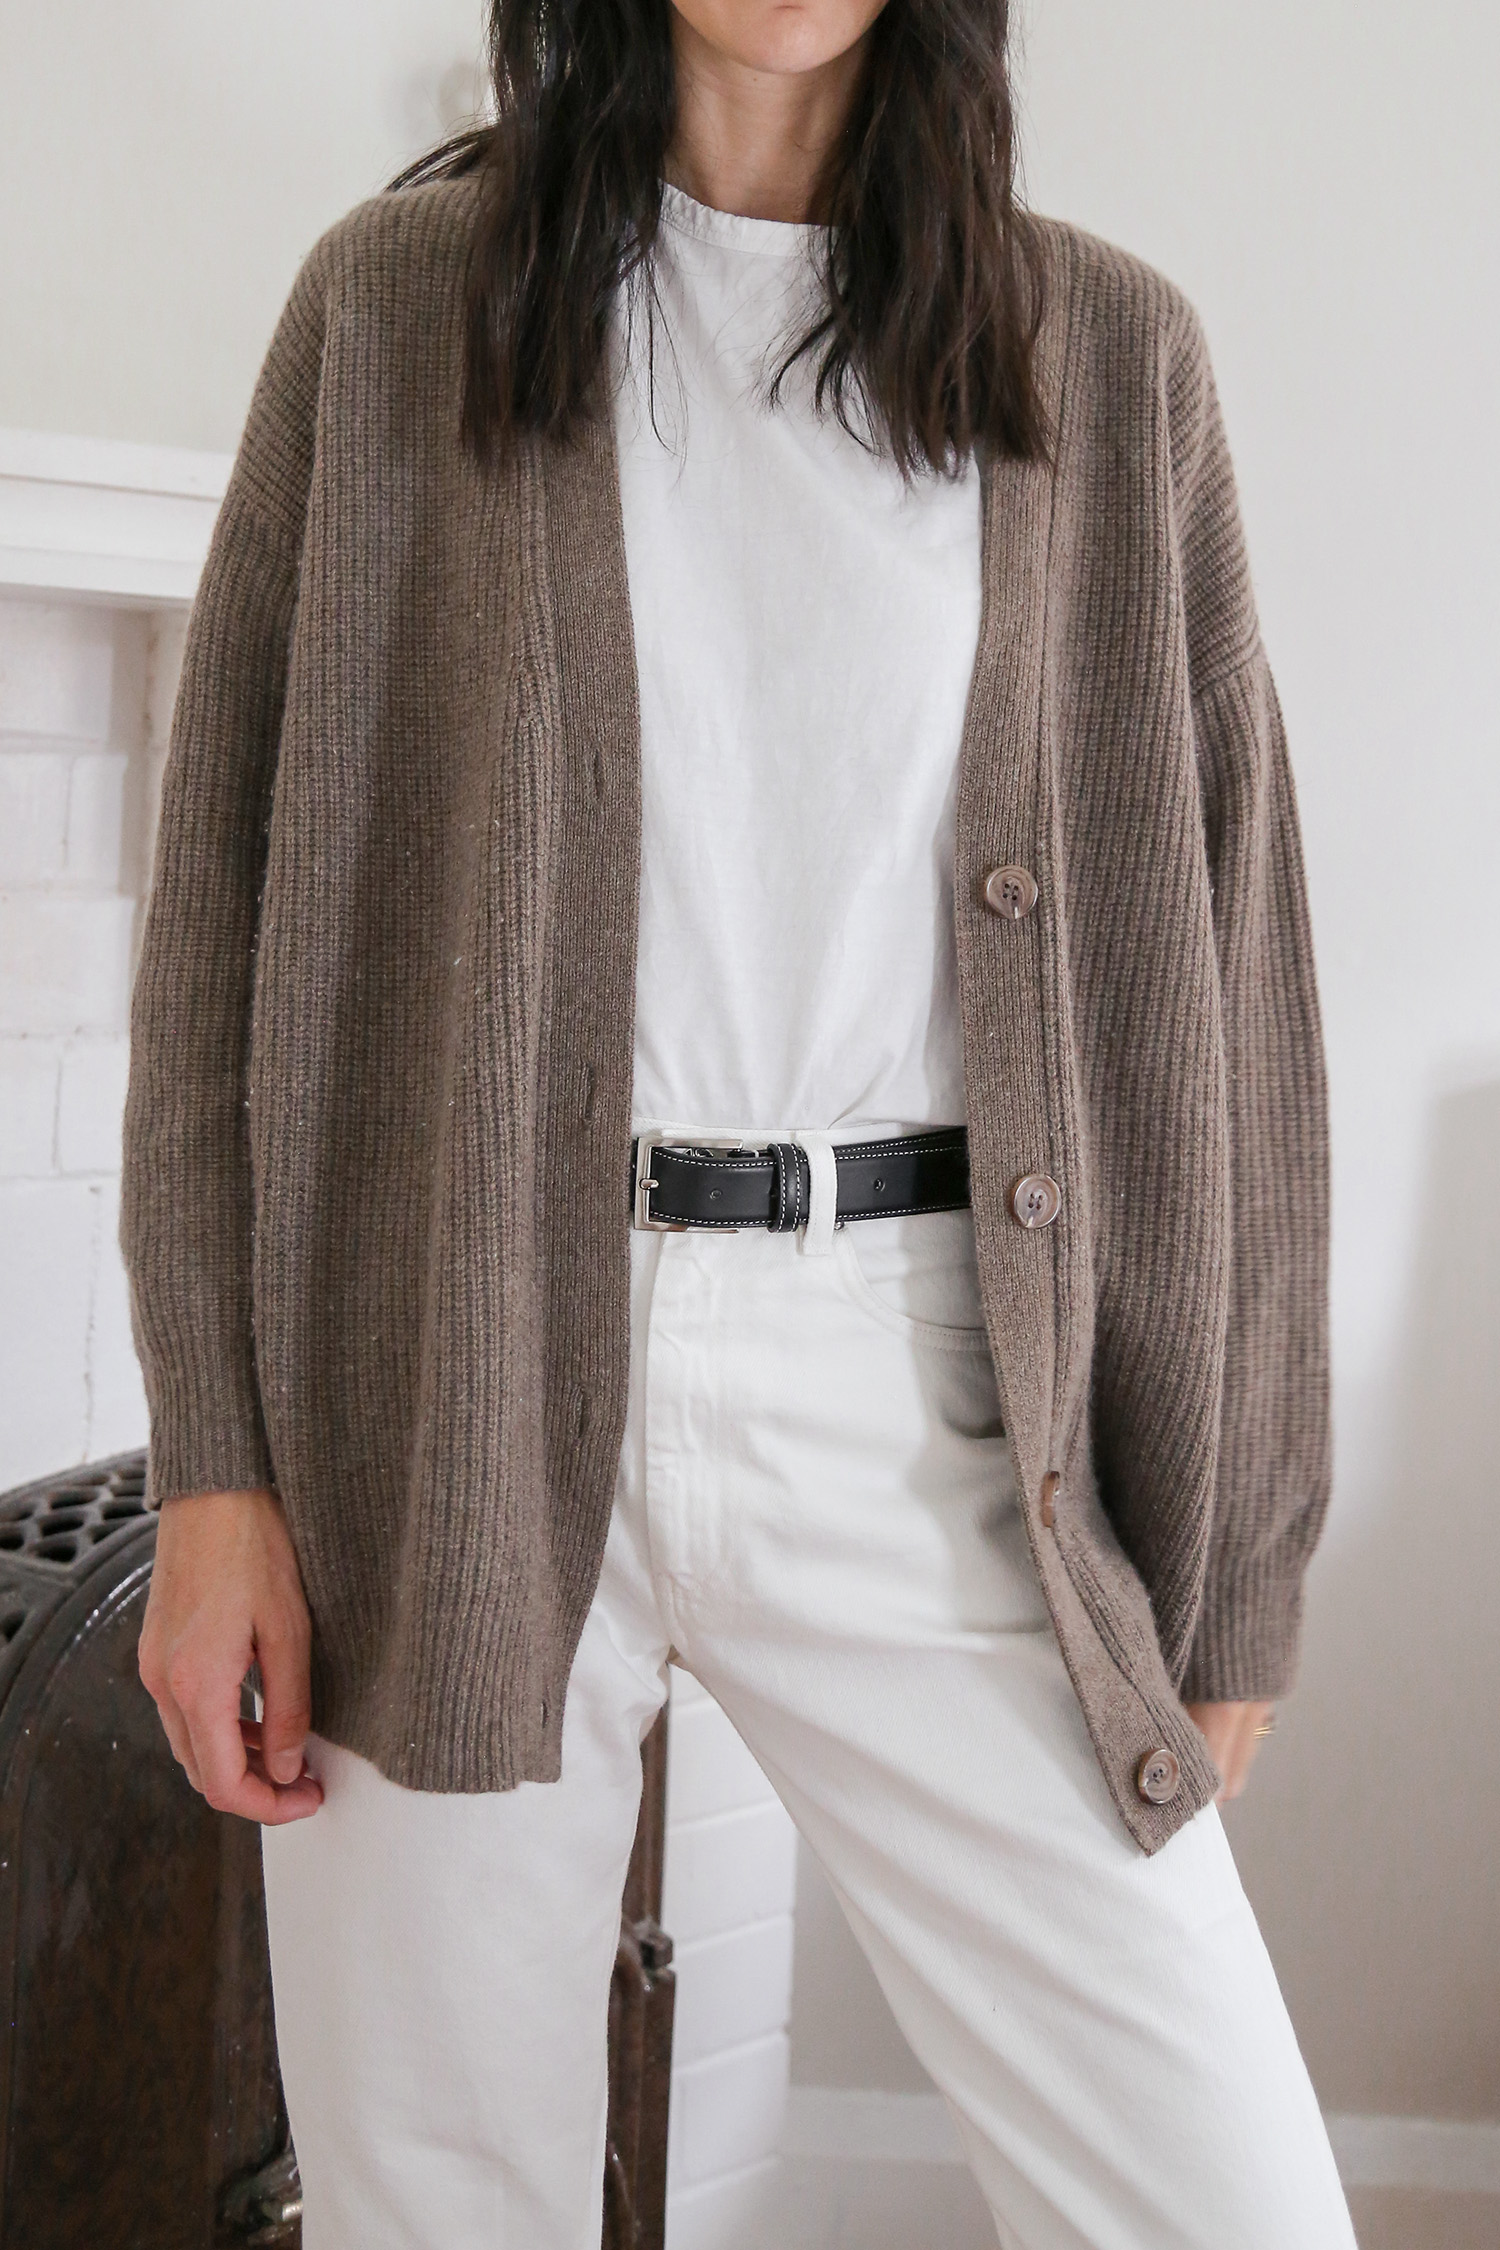 Jenni Kayne Cashmere Cocoon Cardigan review and discount code